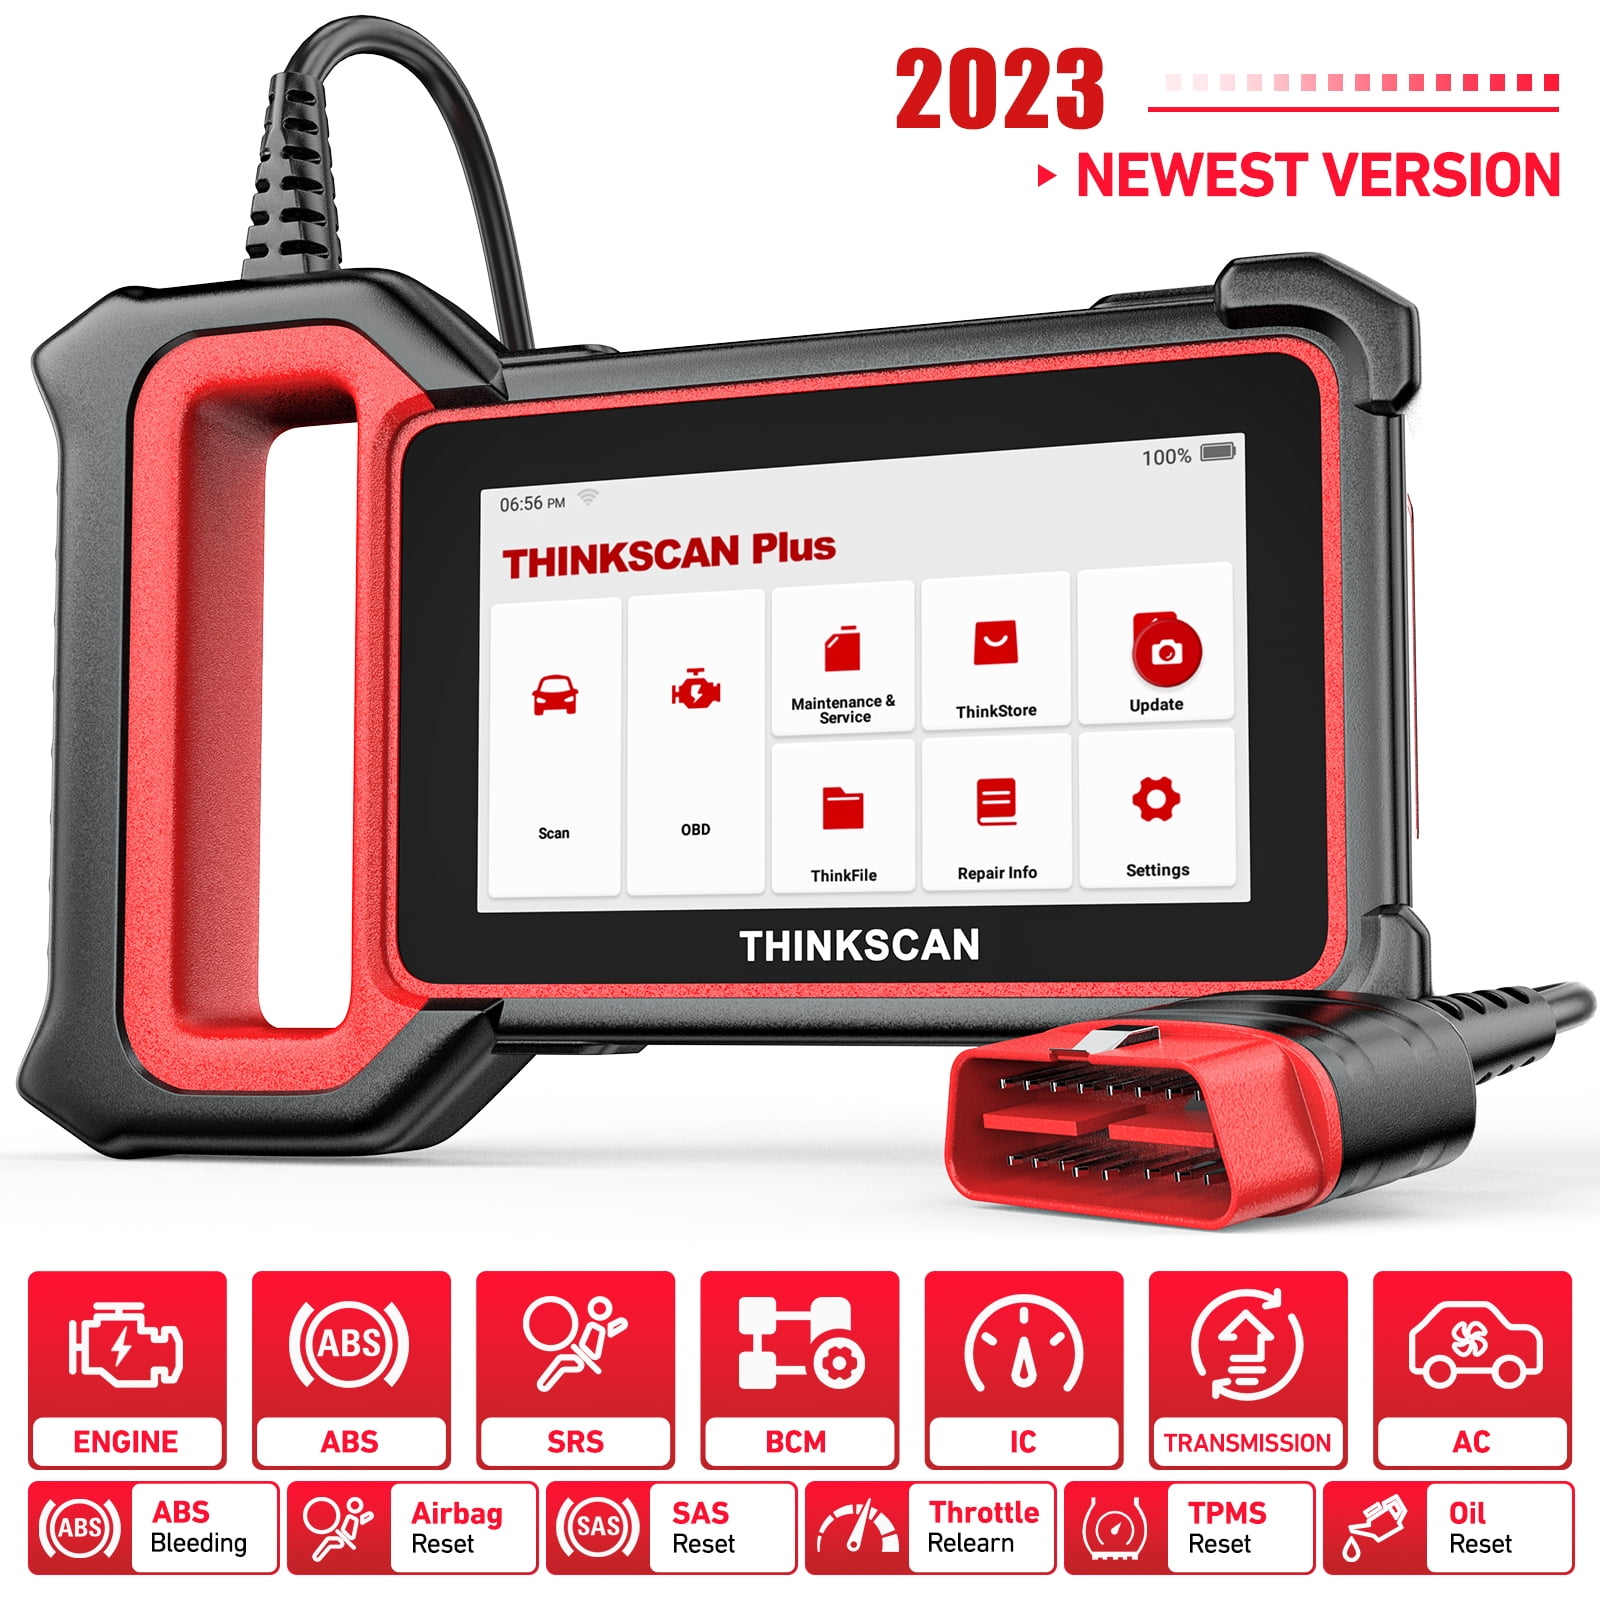 THINKCAR Thinkscan Plus S7 Automotive Diagnostic Scan Tool OBD2 Scanner 7 Systems with Free 5 Services Scanner Code Reader Auto Analyzer E OBD Car Scanner Auto VIN Vehicle Reader -